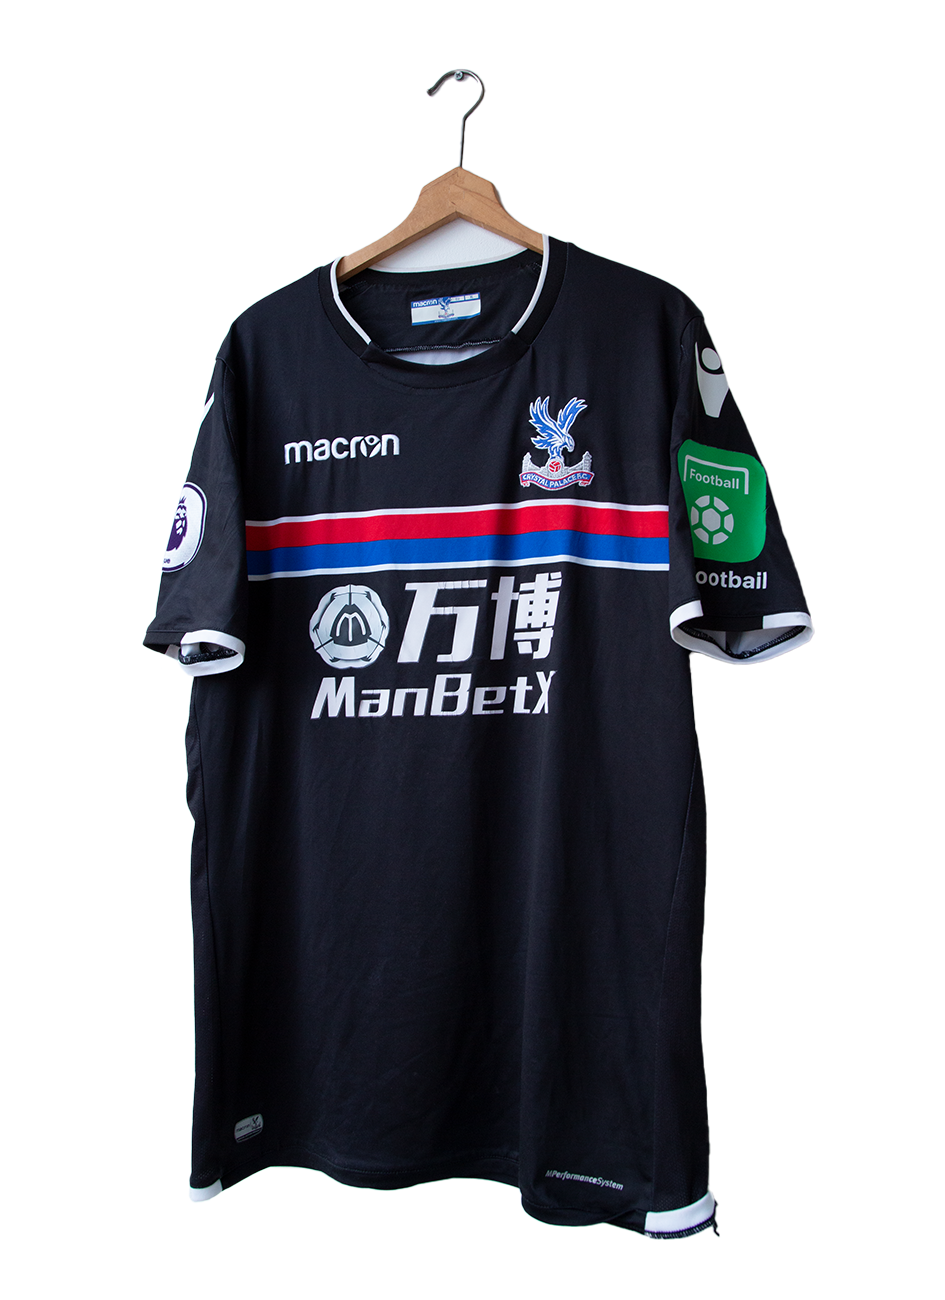 Crystal Palace 2017-2018 Player Issued/Worn Away Shirt Milivojevic #4